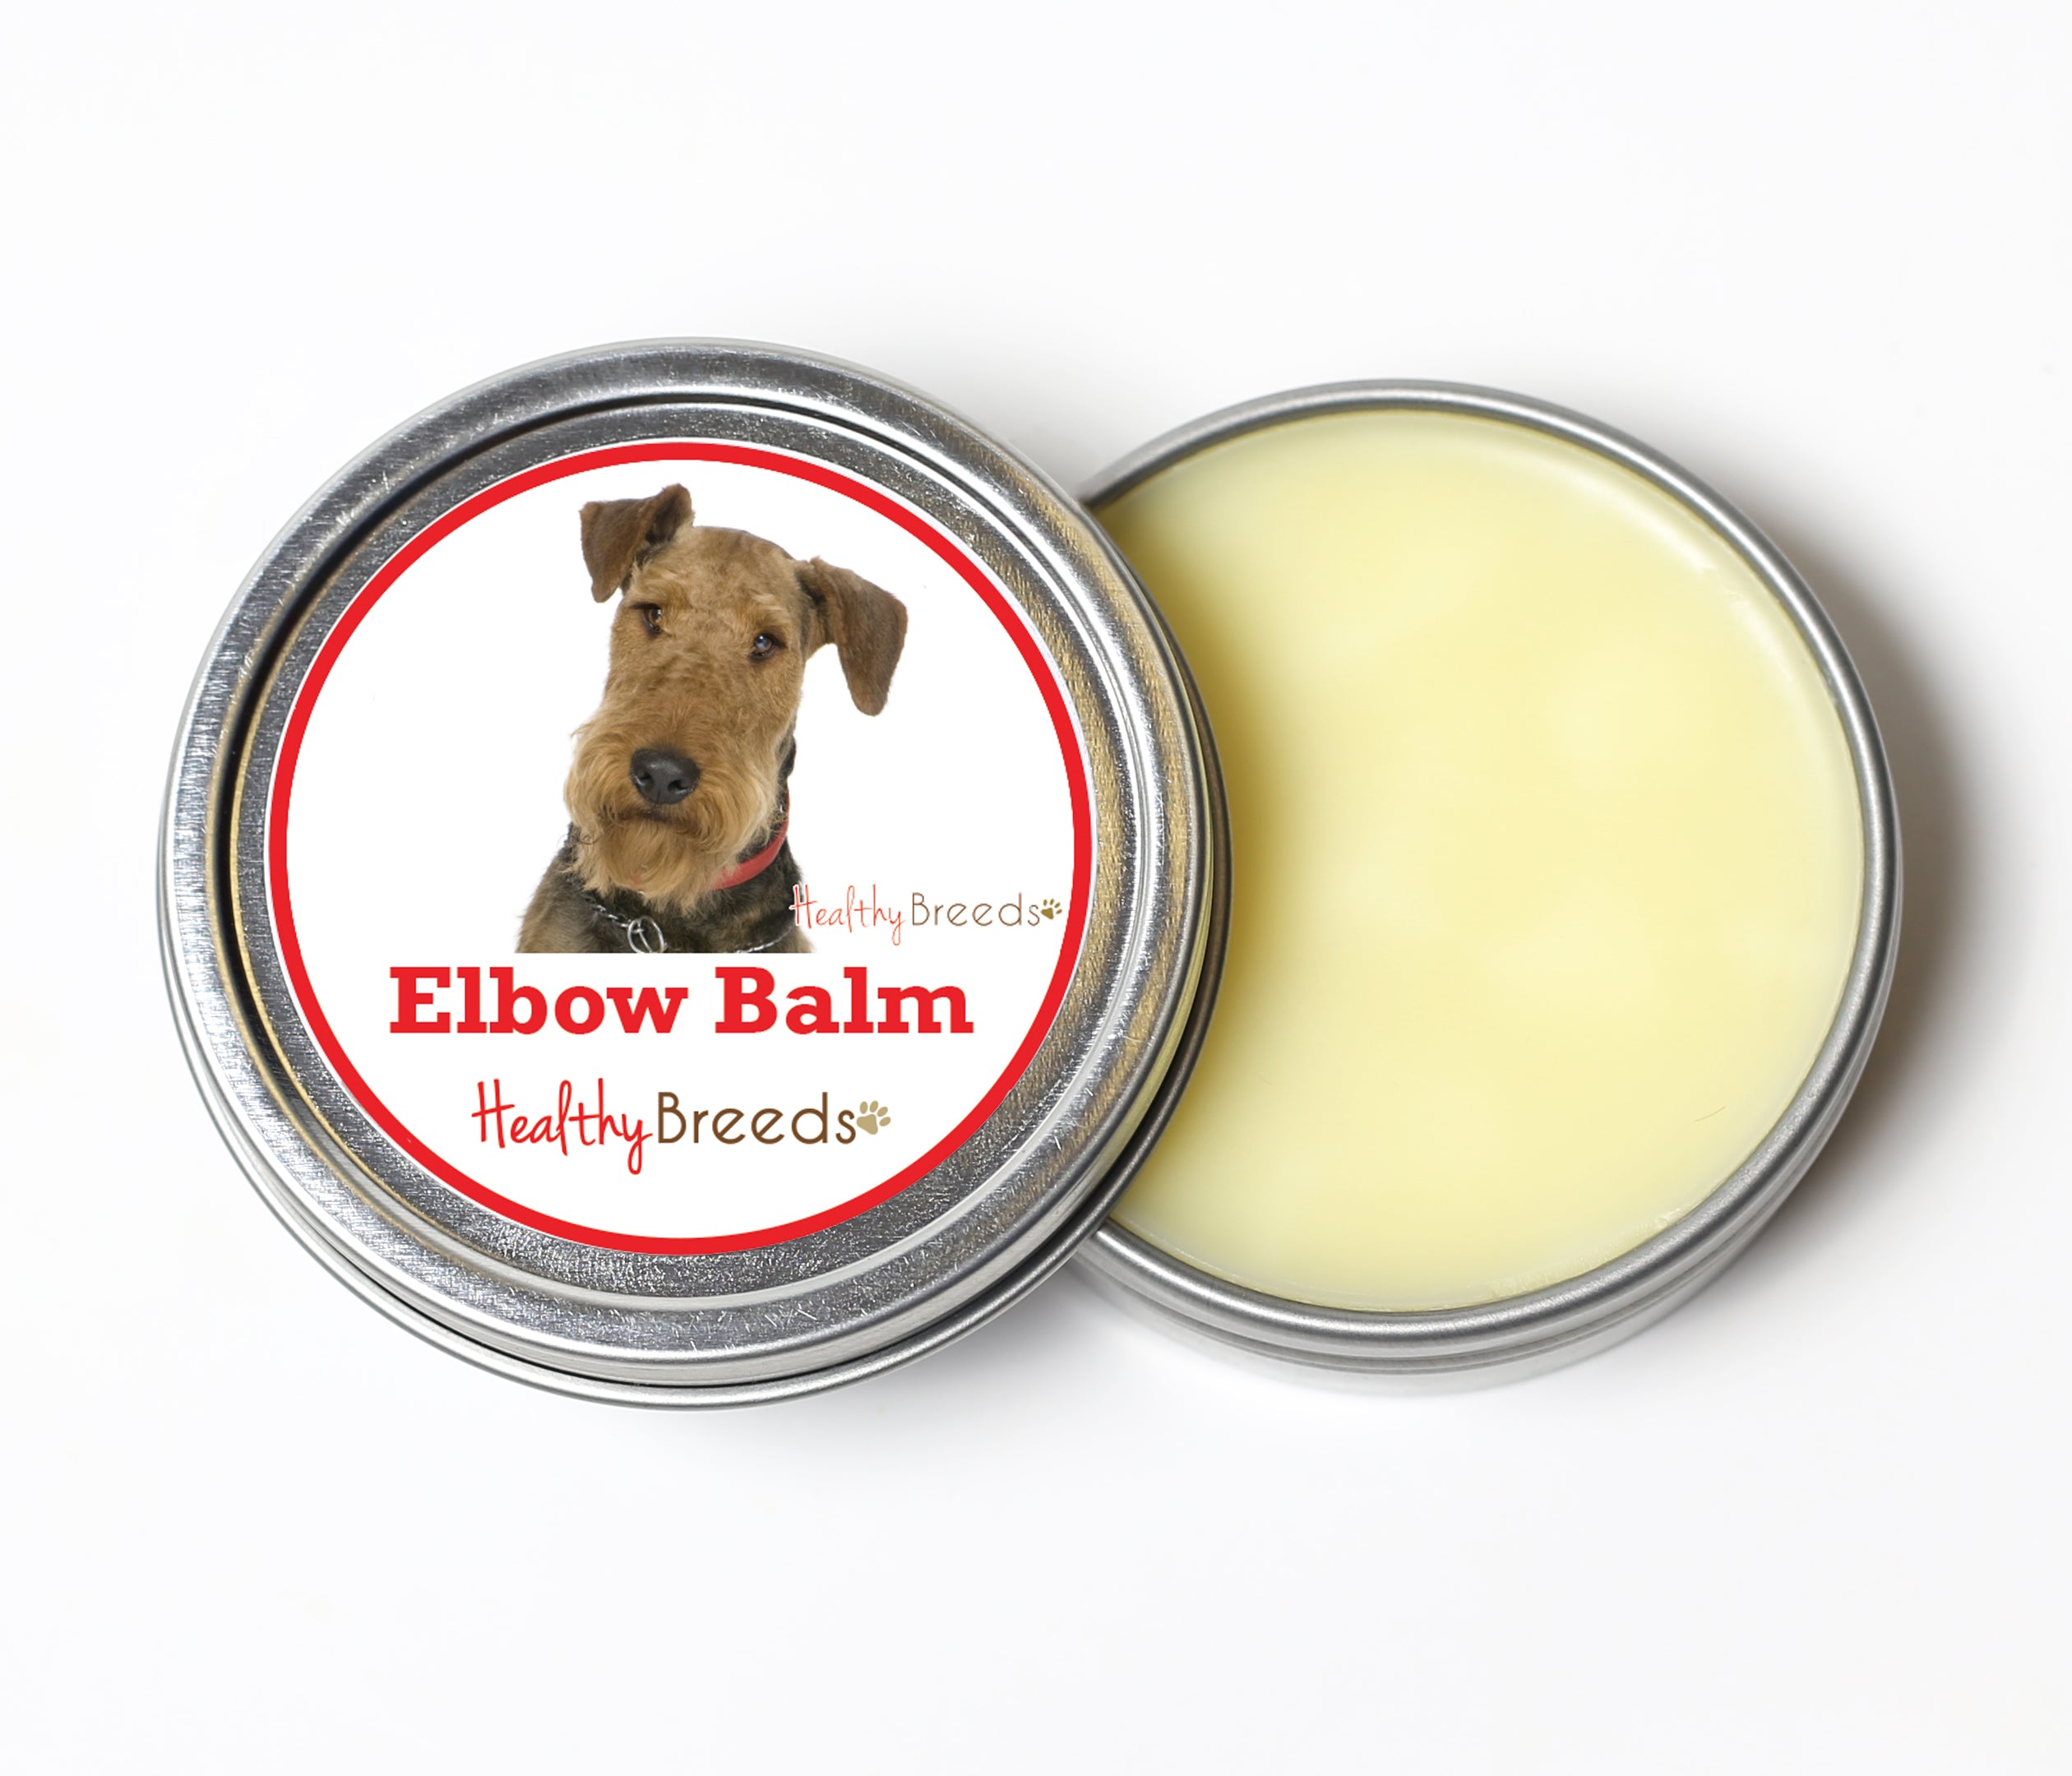 Airedale Terrier Dog Elbow Balm 2 oz